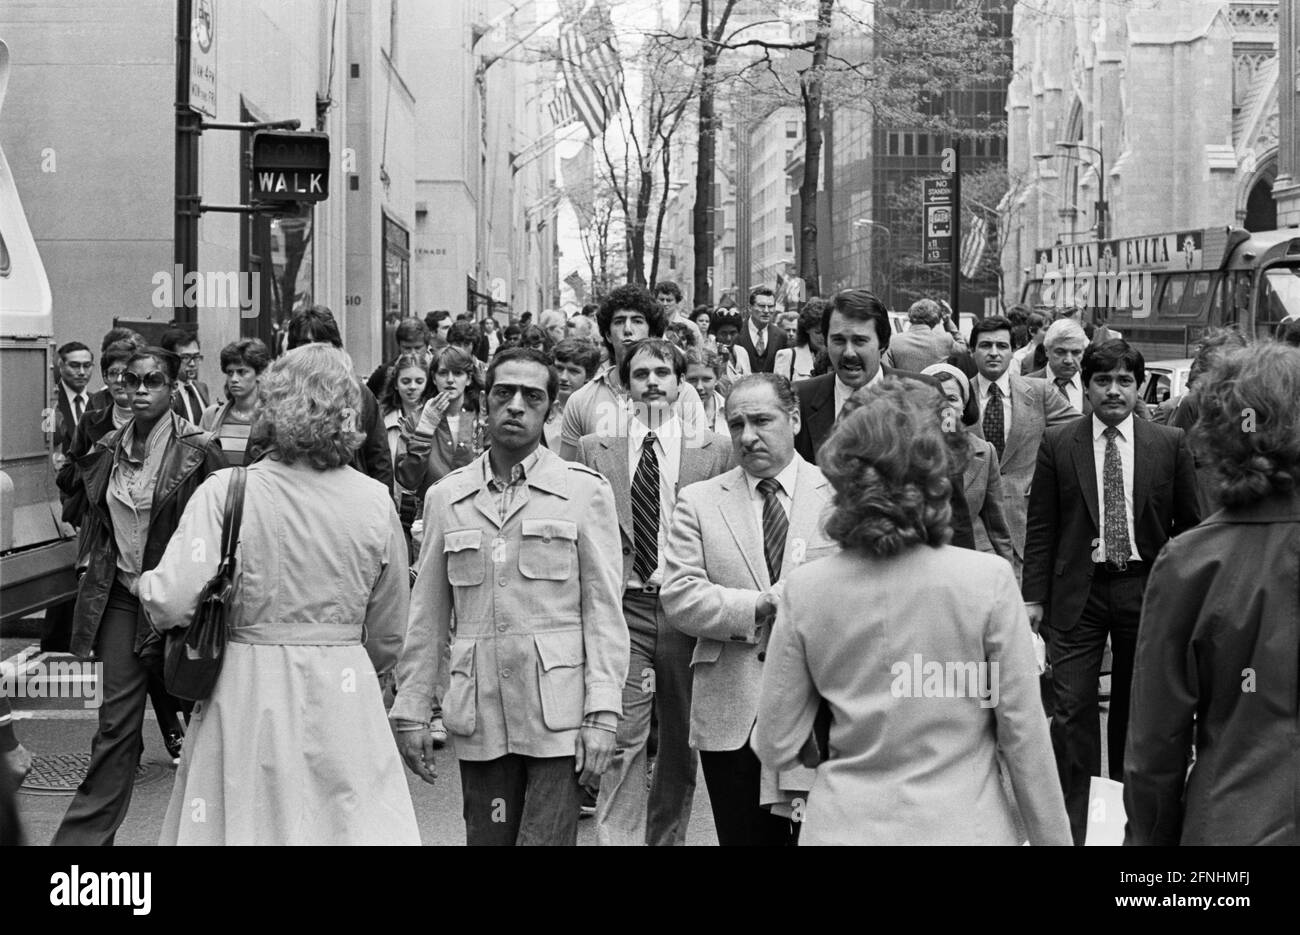 New York City Photo Essay, April 30, 1981- Multicultural crowd walking on 5th Avenue. St. Patrick's Cathedral in the background. Stock Photo